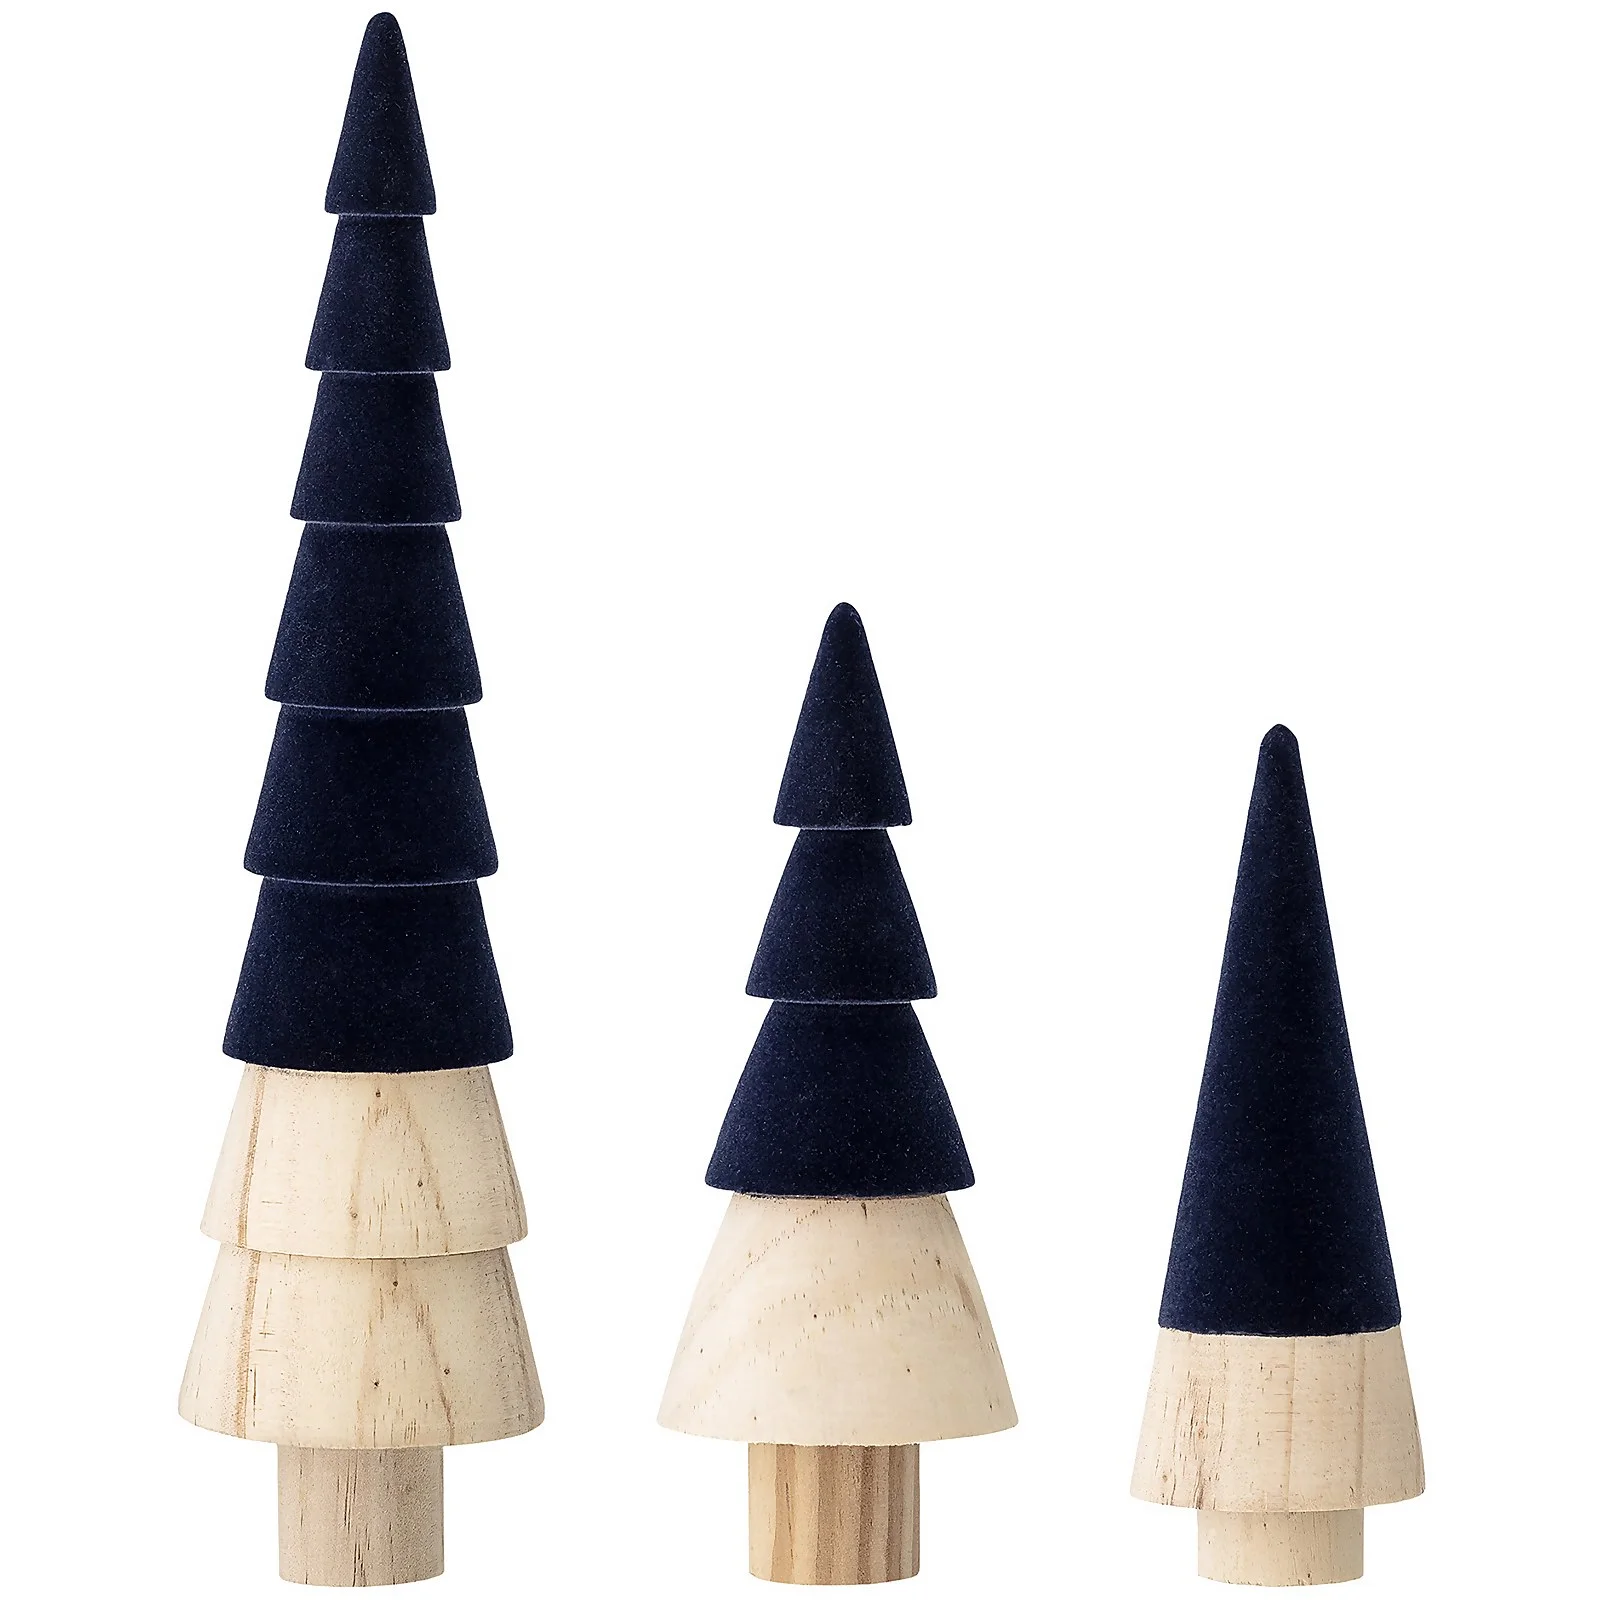 Bloomingville Wooden Christmas Tree Decoration - Set of 3 - Blue Image 1